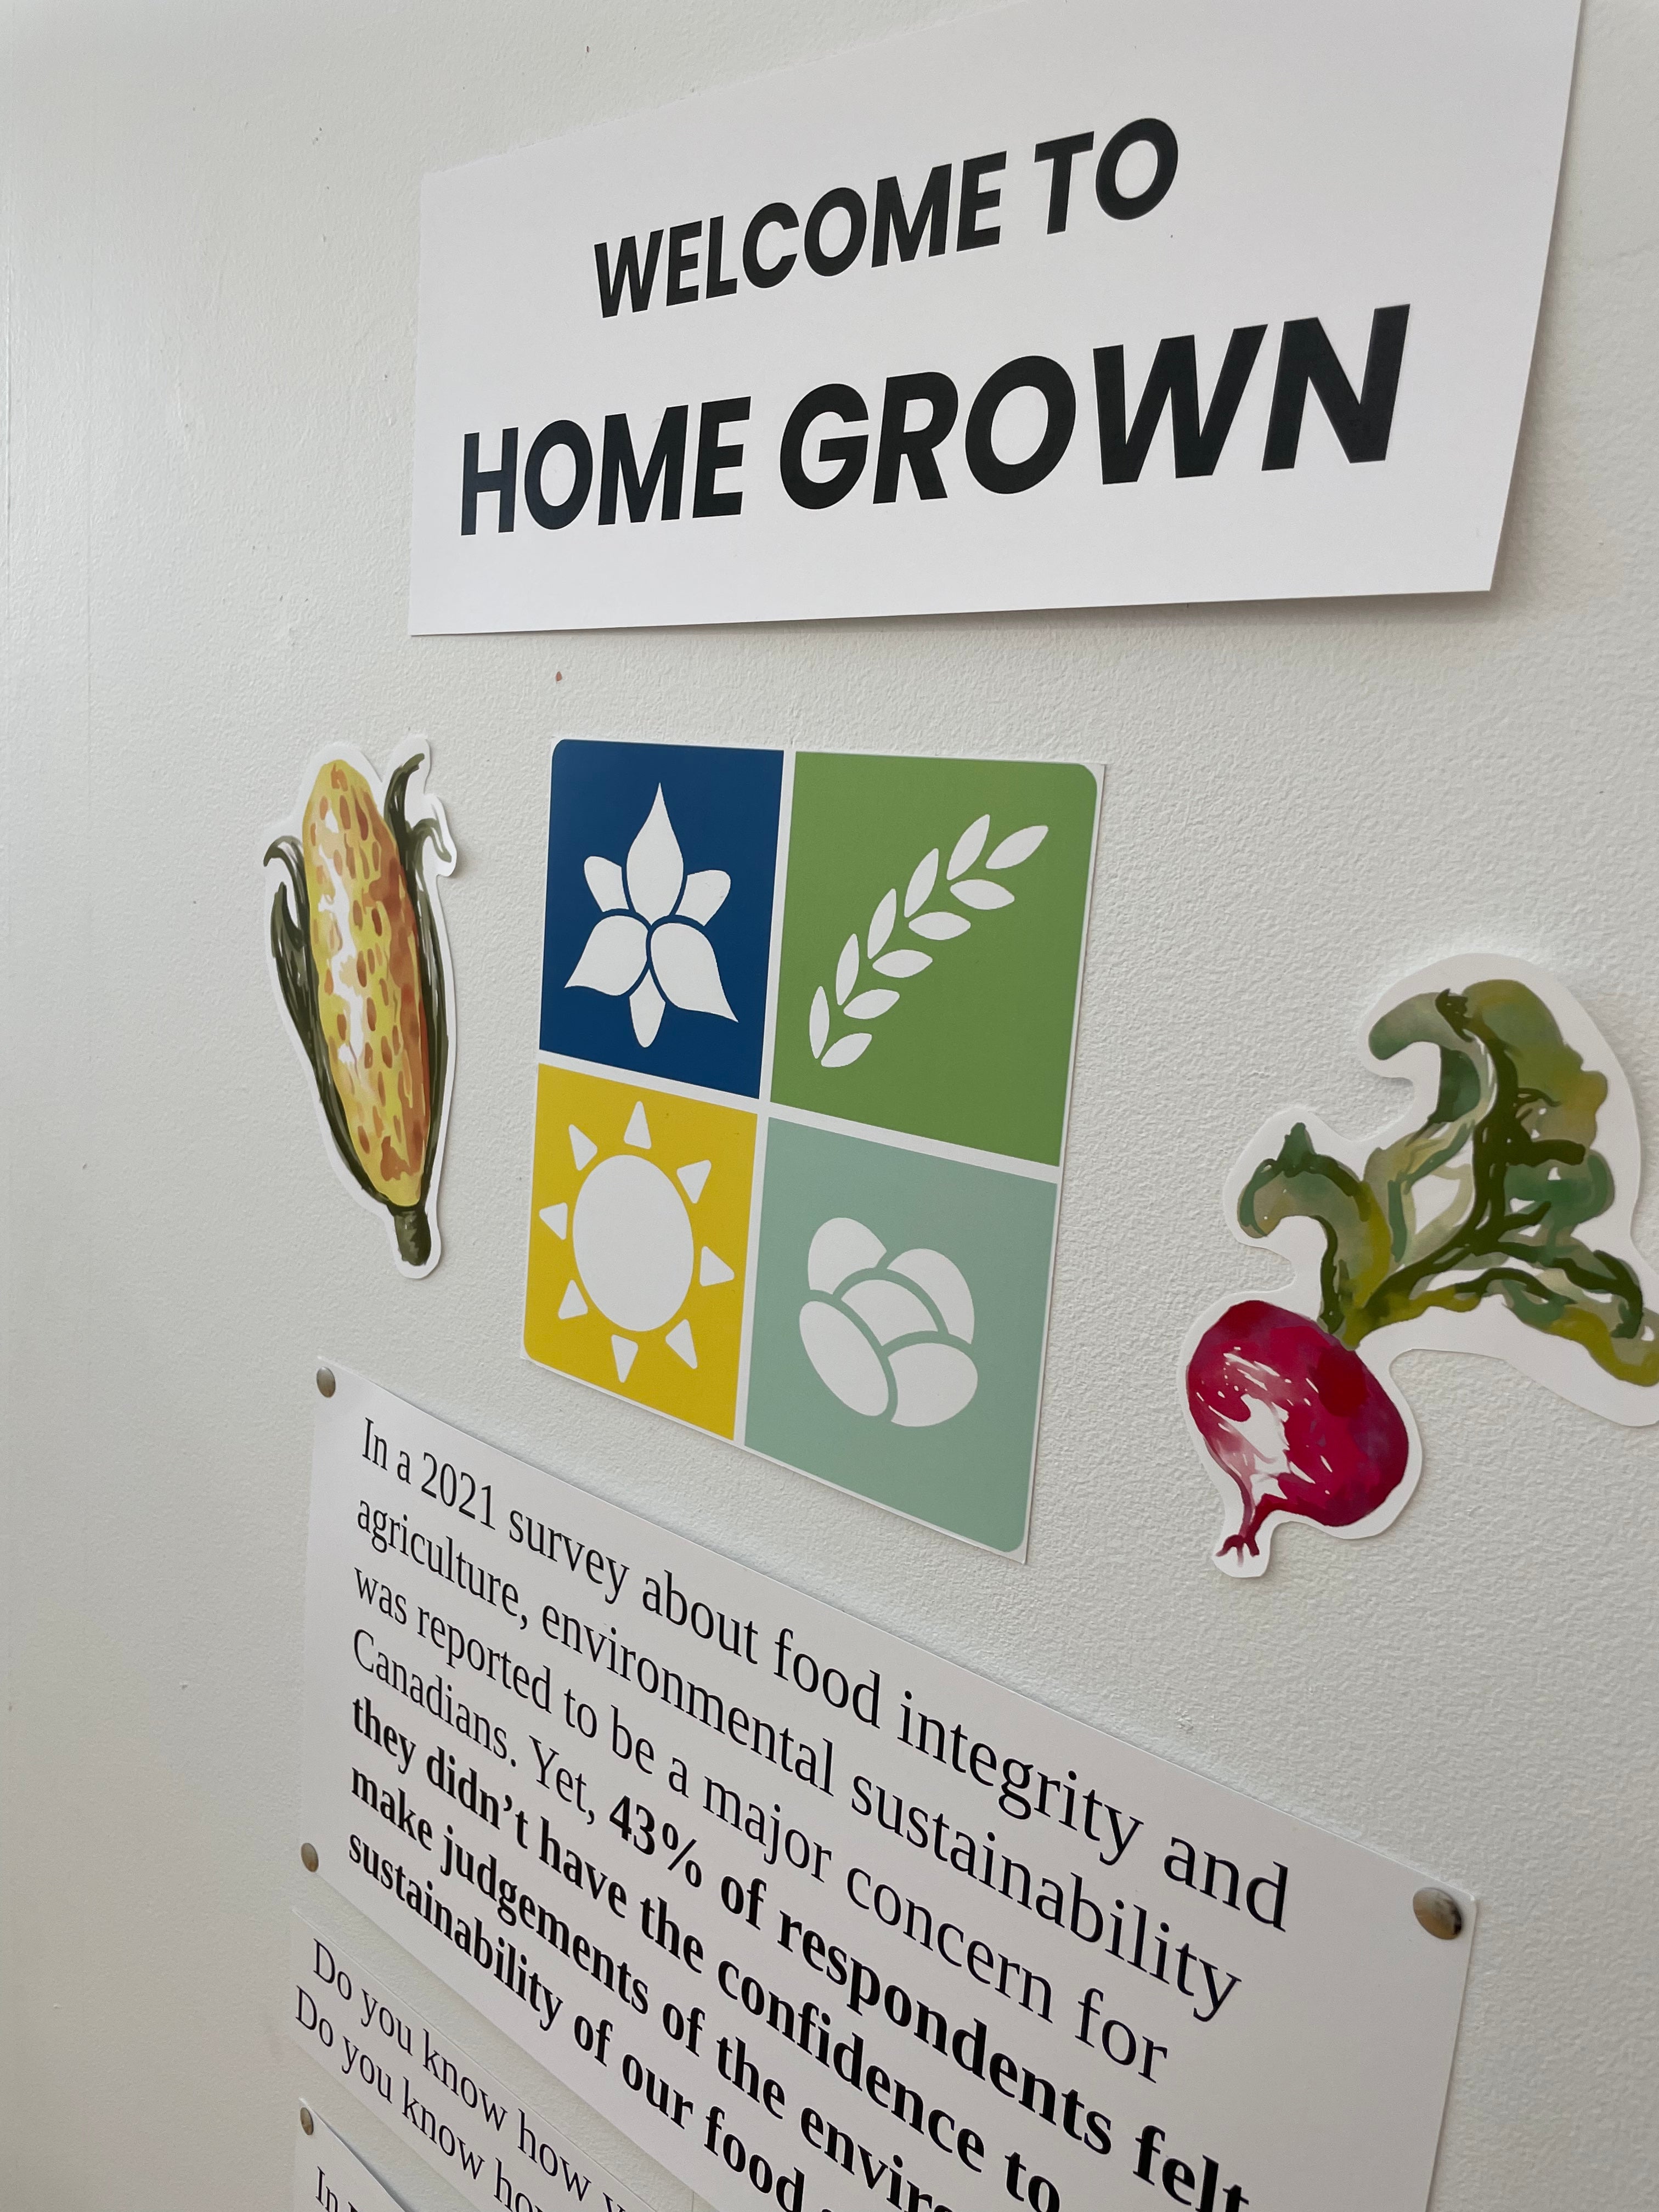 welcome sign of Home Grown exhibit